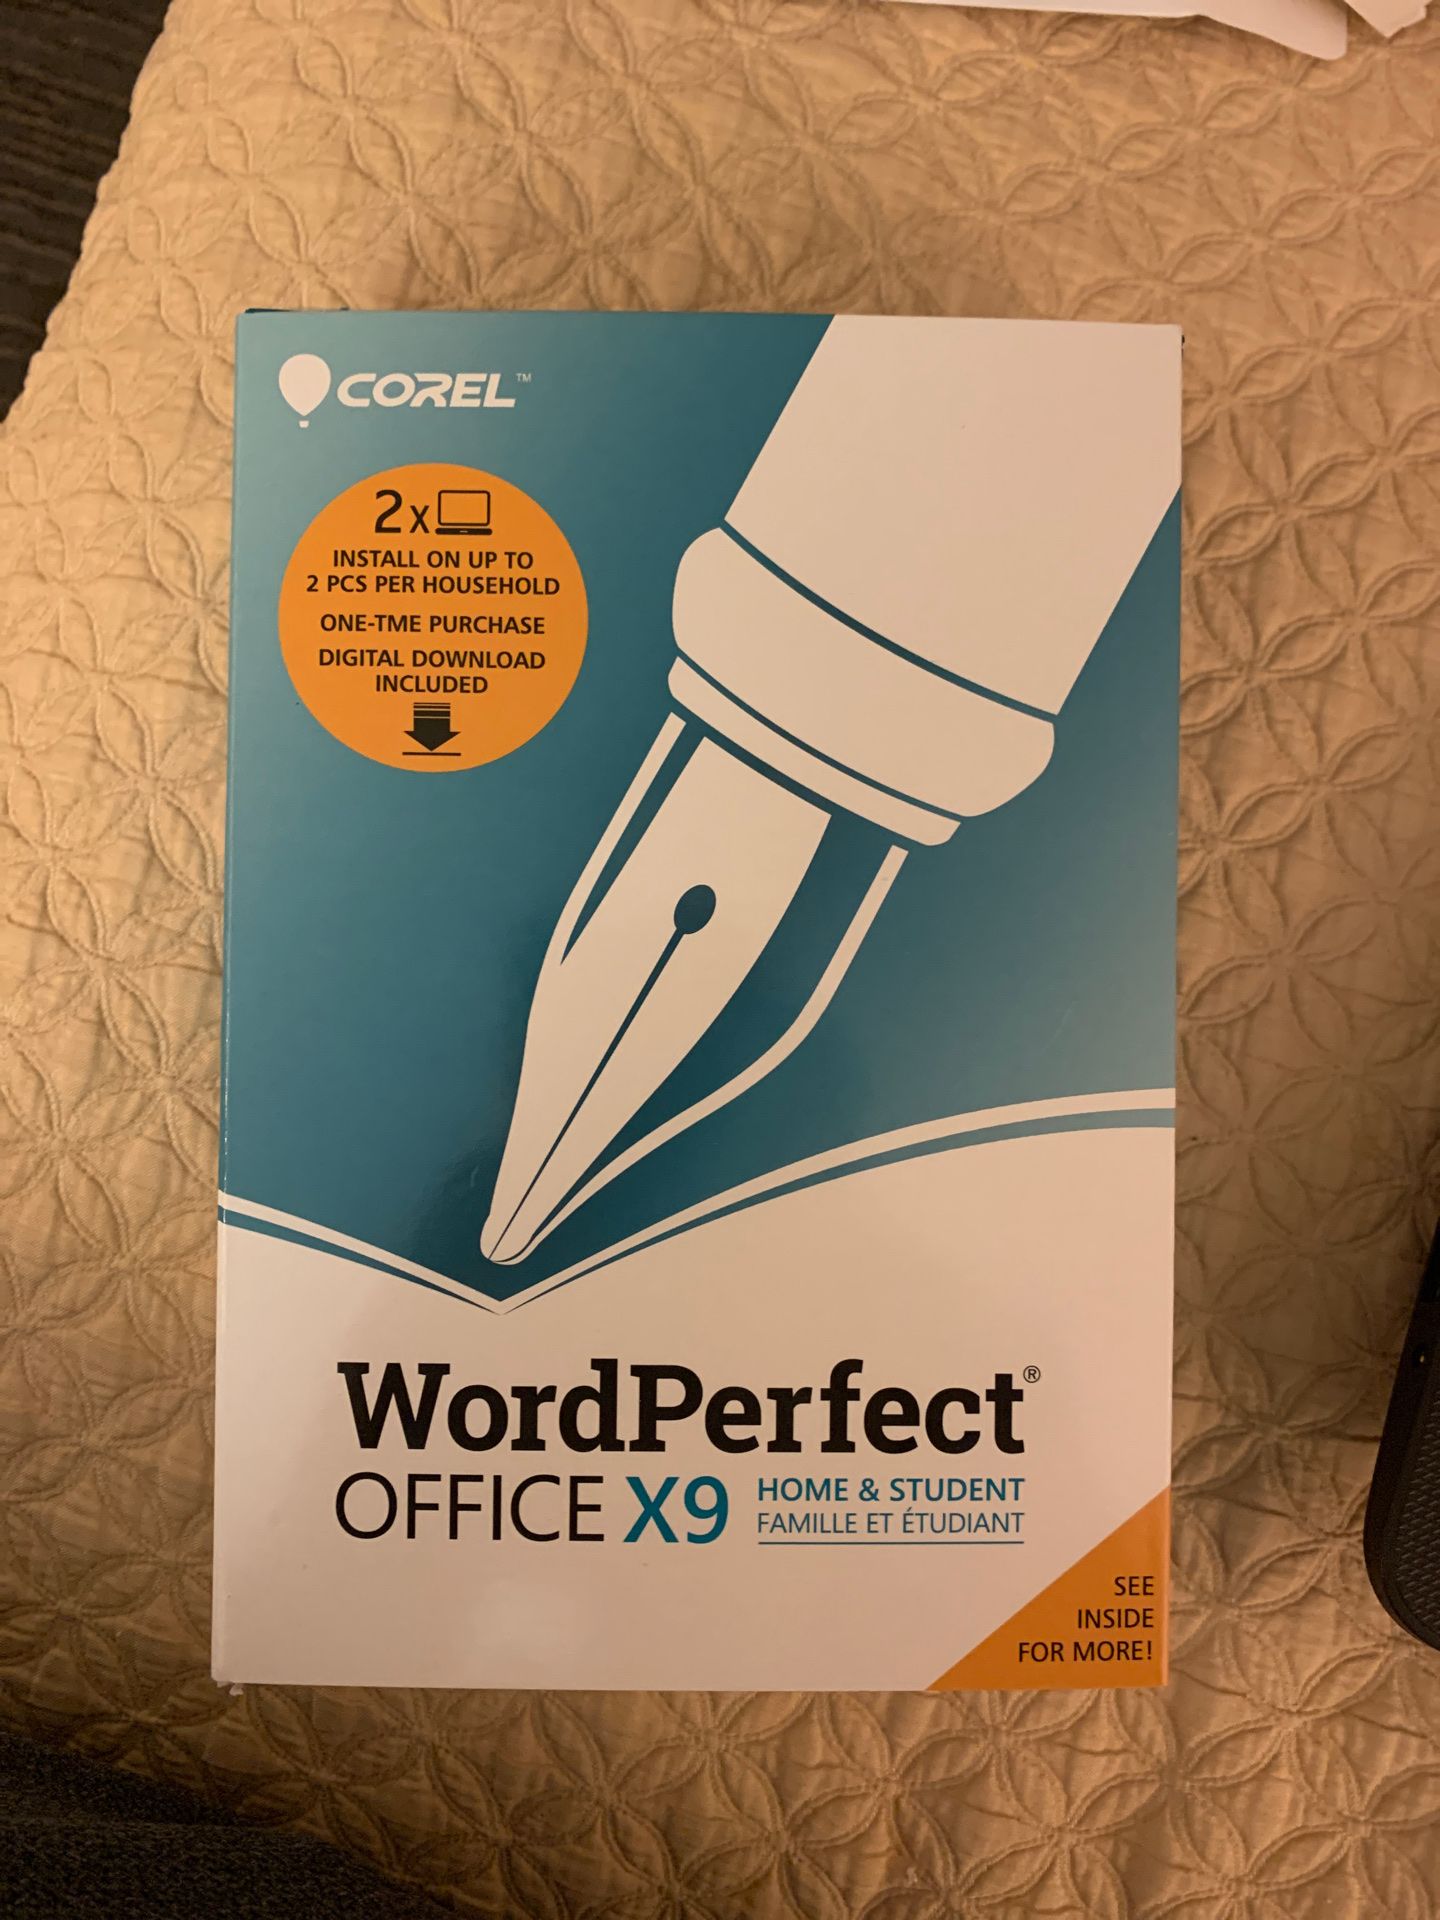 WordPerfect Office X9 home&student